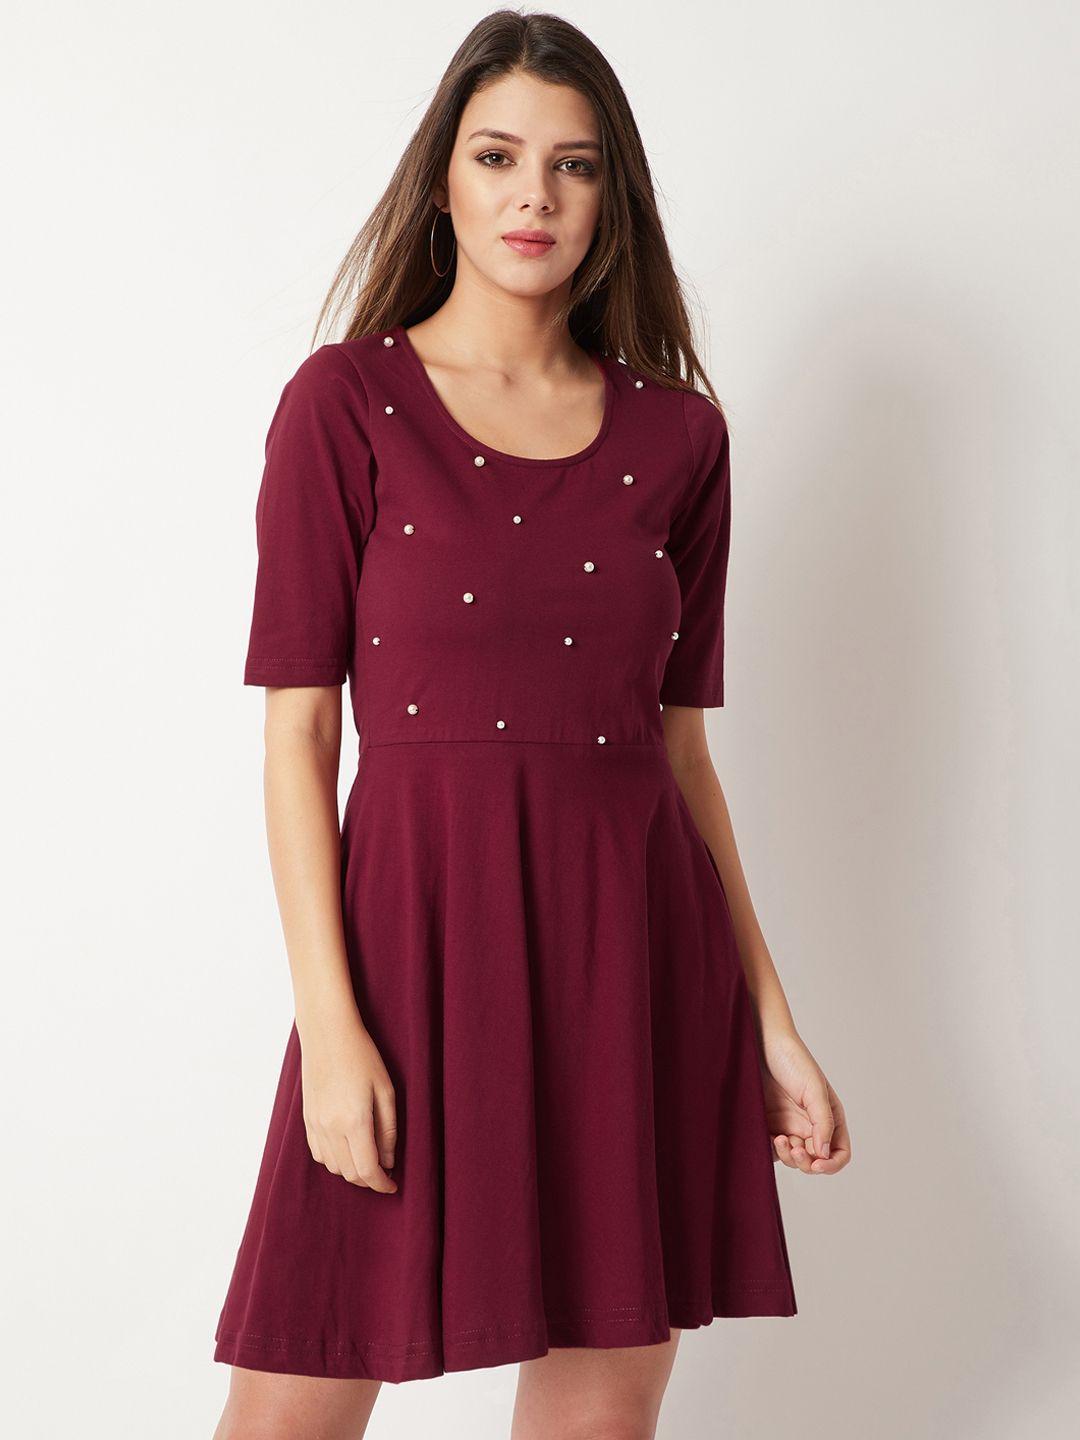 miss-chase-women-maroon-embellished-fit-and-flare-dress